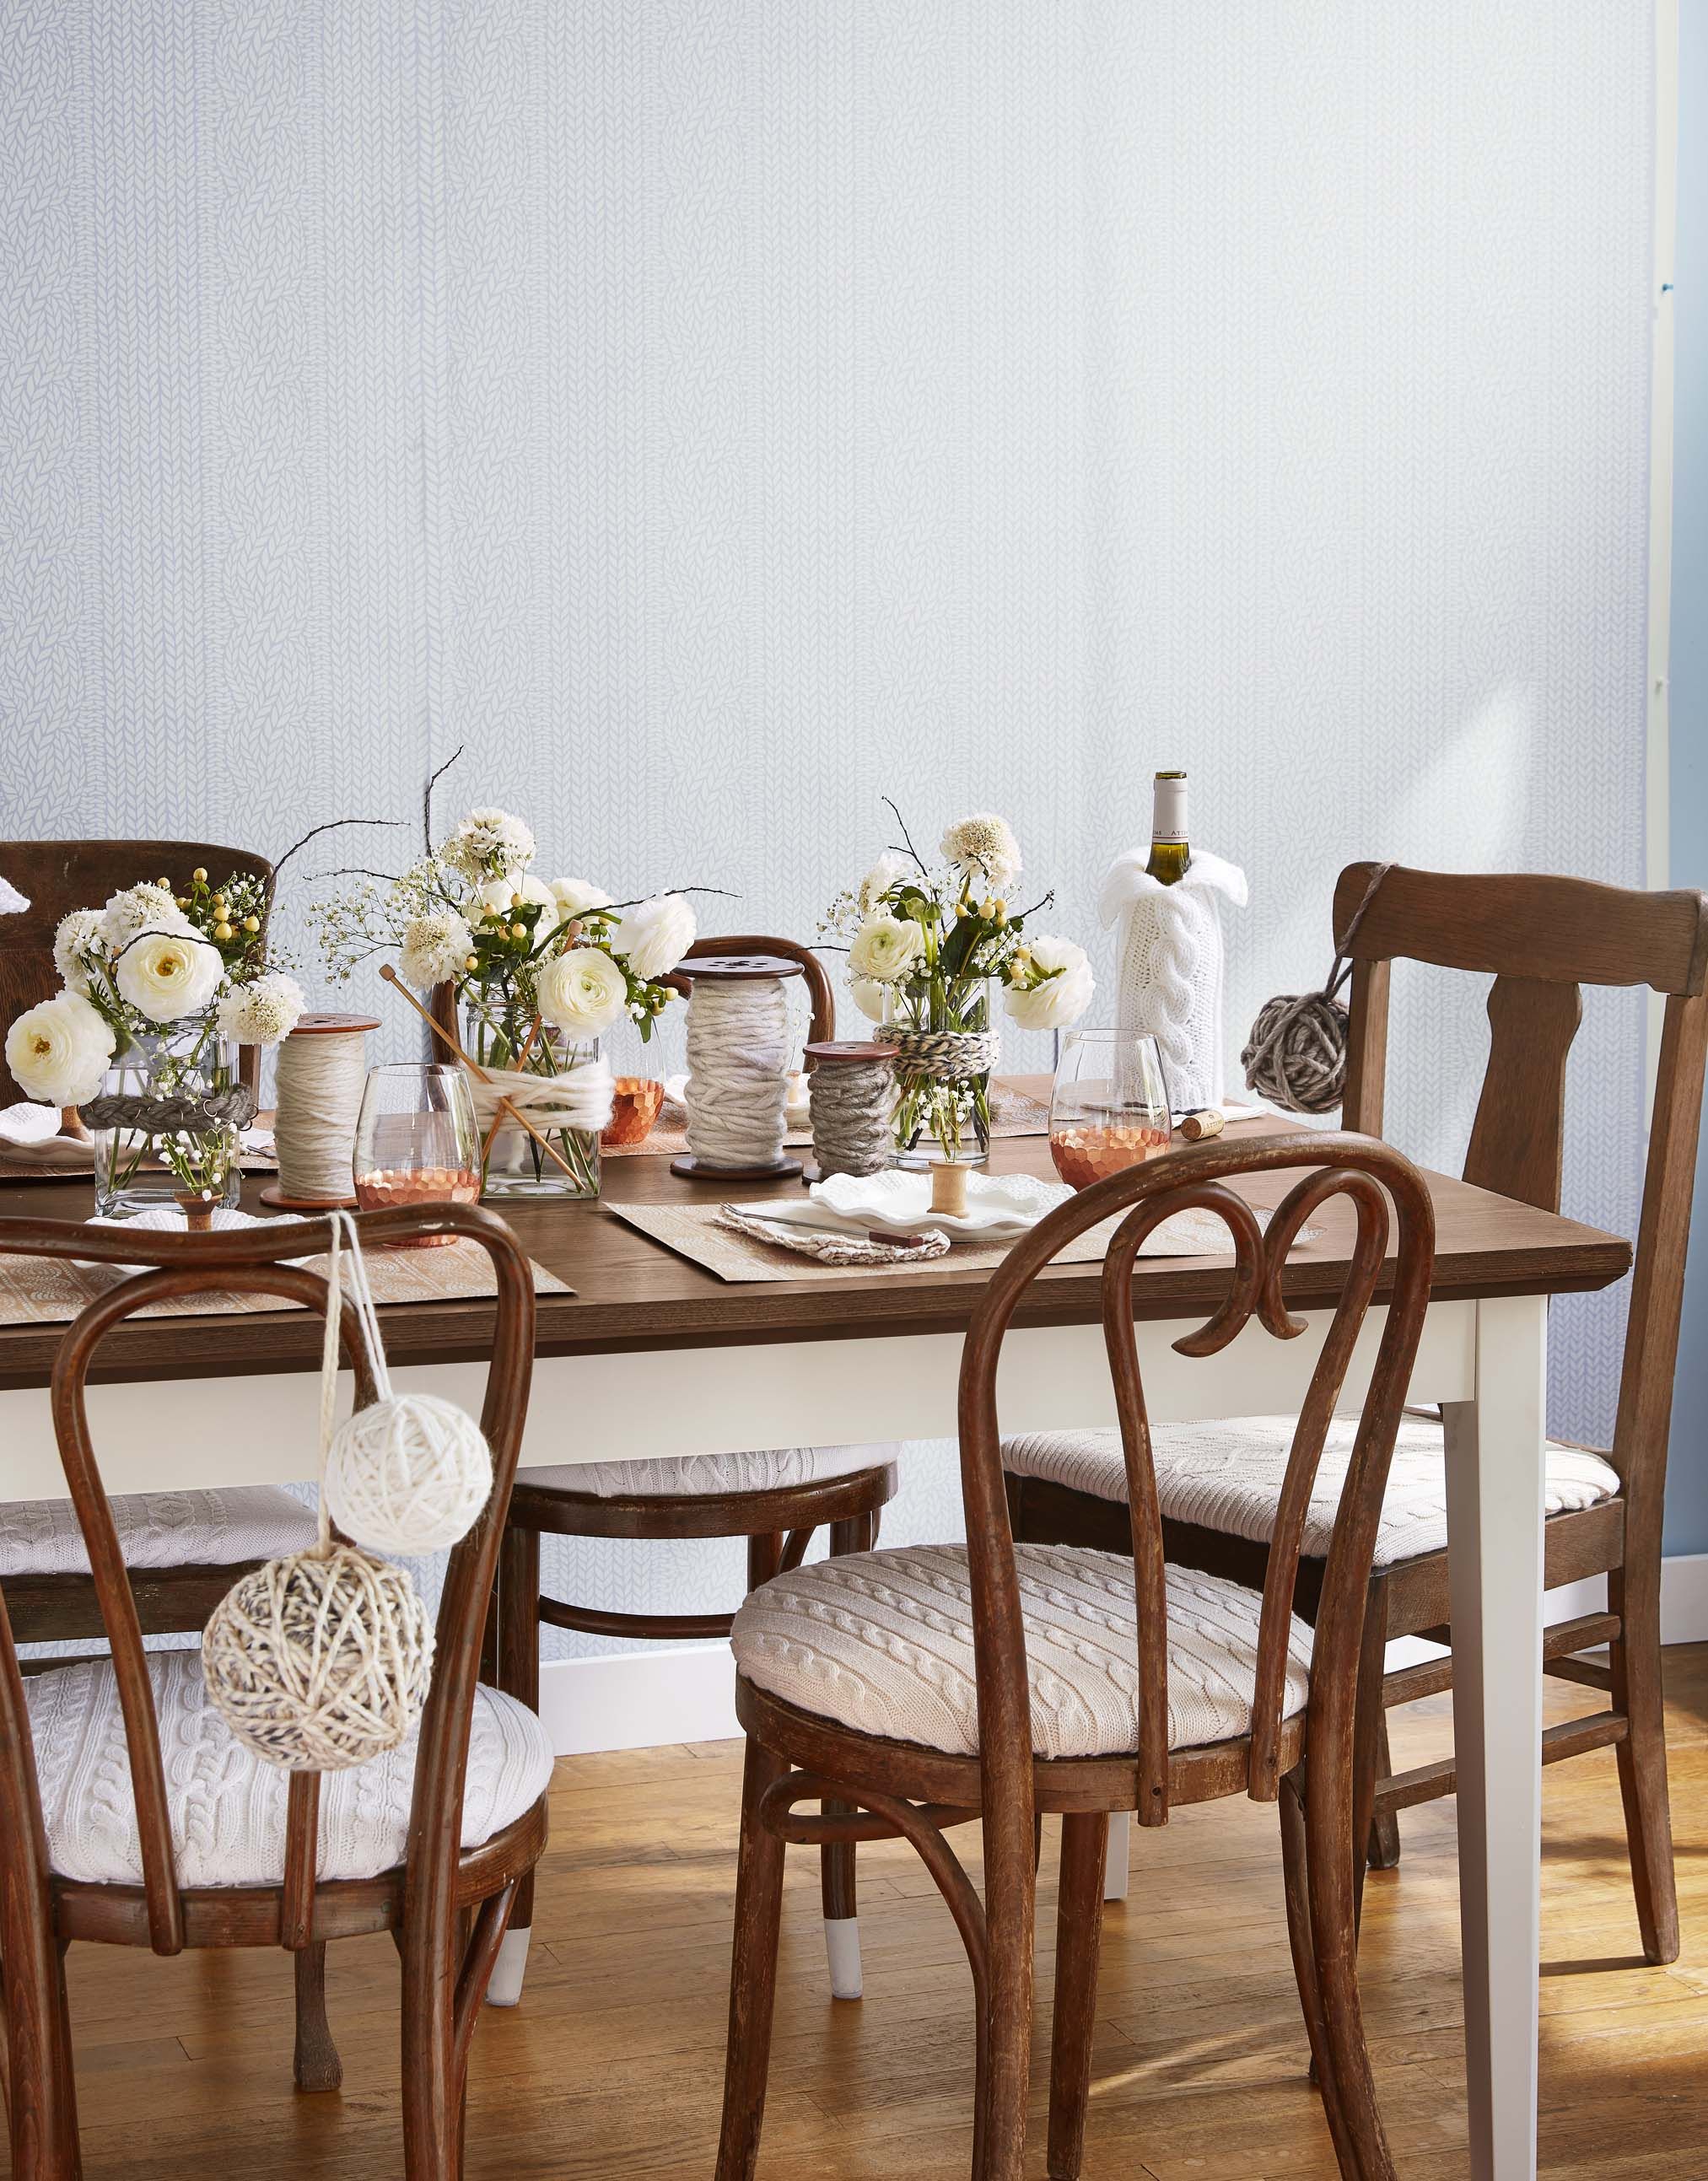 Dining table decor ideas: 10 tips for beautiful tablescapes |